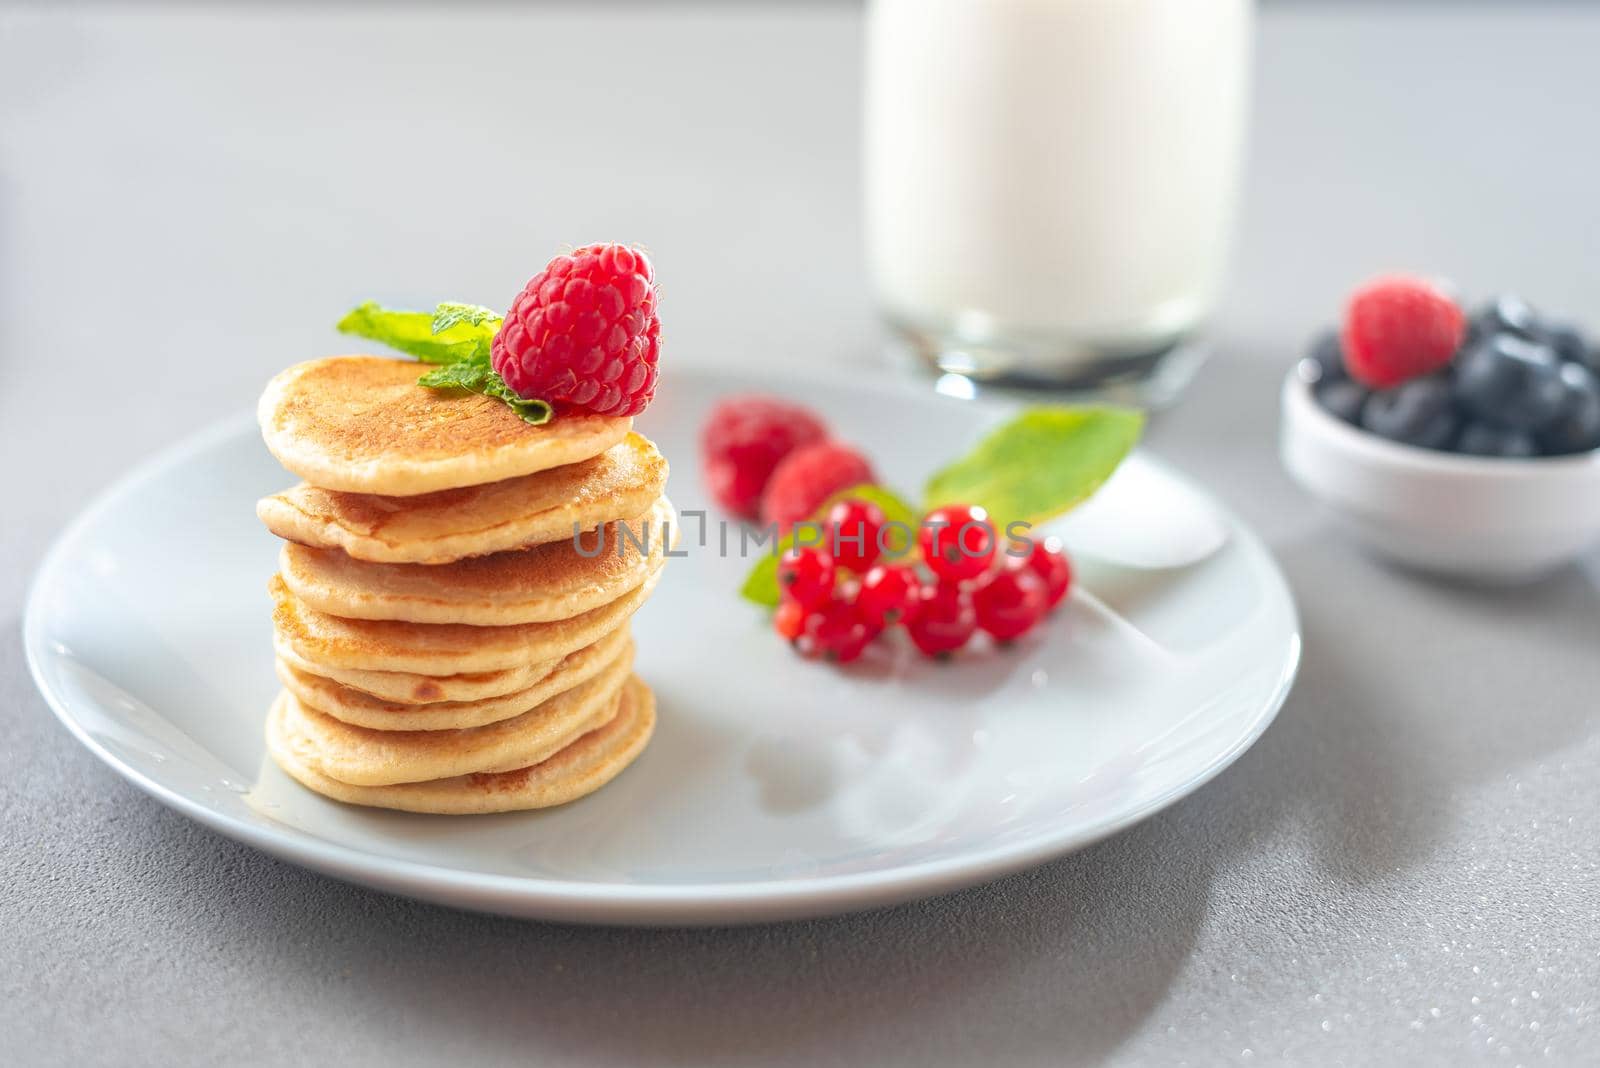 Pancakes with berries on a white plate. American Pancake Mini Pancakes with berries.